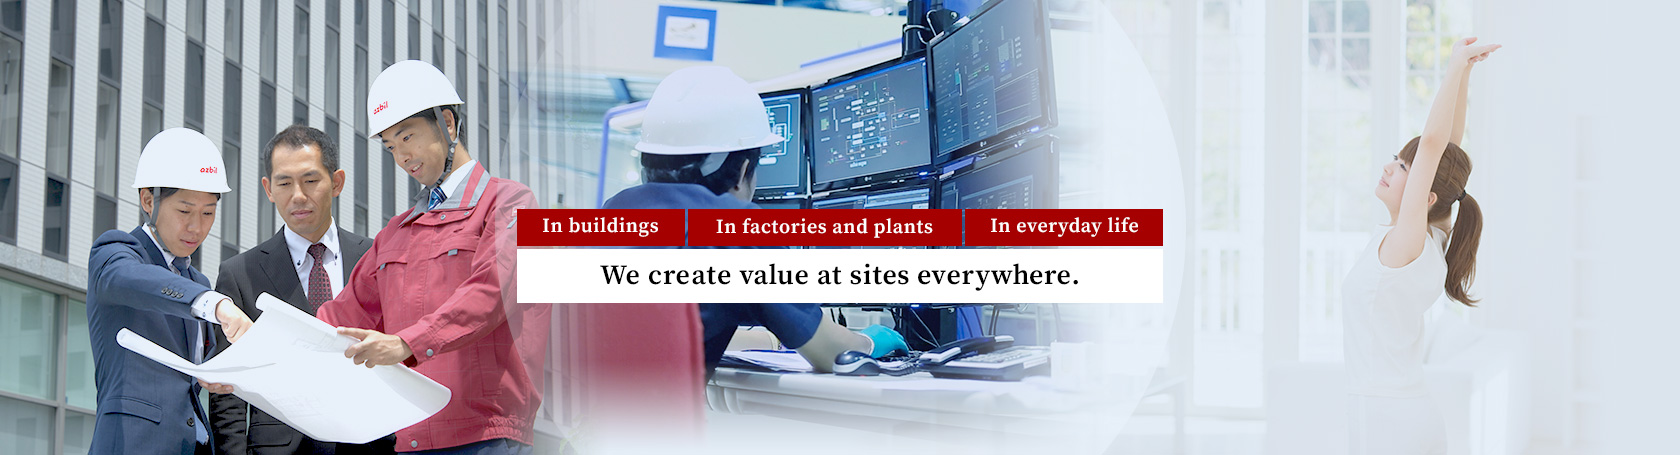 We create value at sites everywhere.